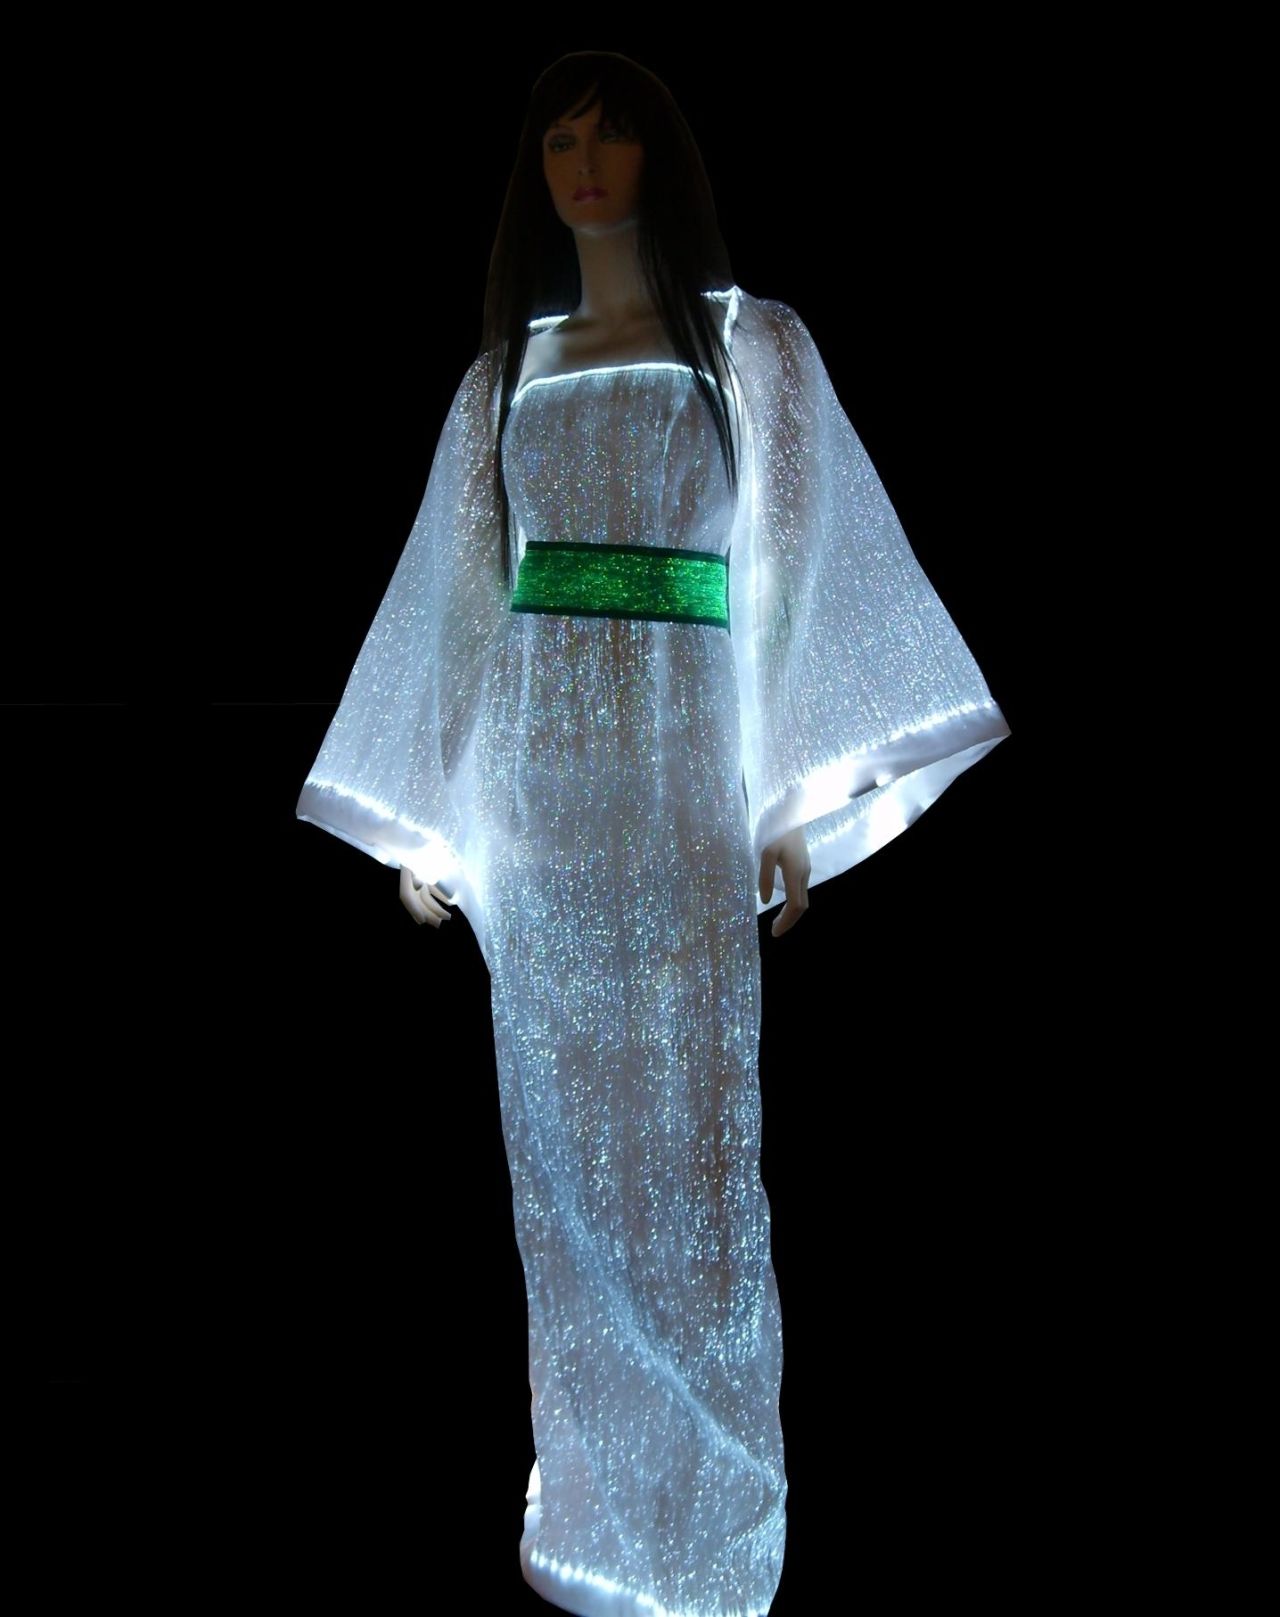 Glow in the dark with the <a href="http://www.lumigram.com/catalog/product_info.php?products_id=112" target="_blank" target="_blank">LumiDress.</a> Made up of ultra-thin optical fibers woven together with other synthetic fiber this dress will light up the night. 